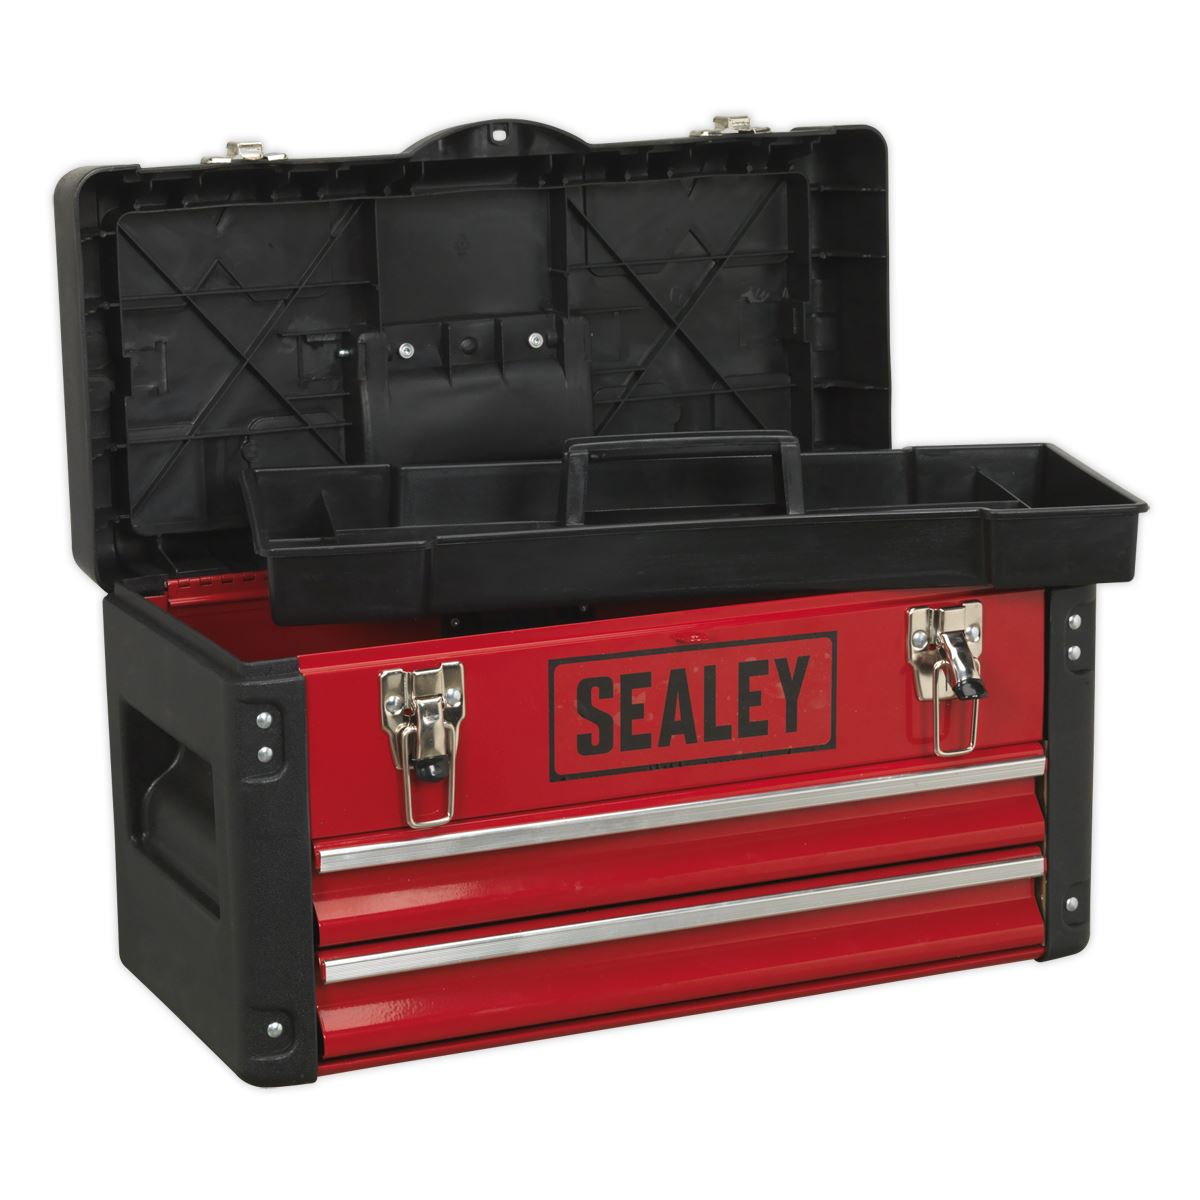 Sealey Toolbox with 2 Drawers 500mm